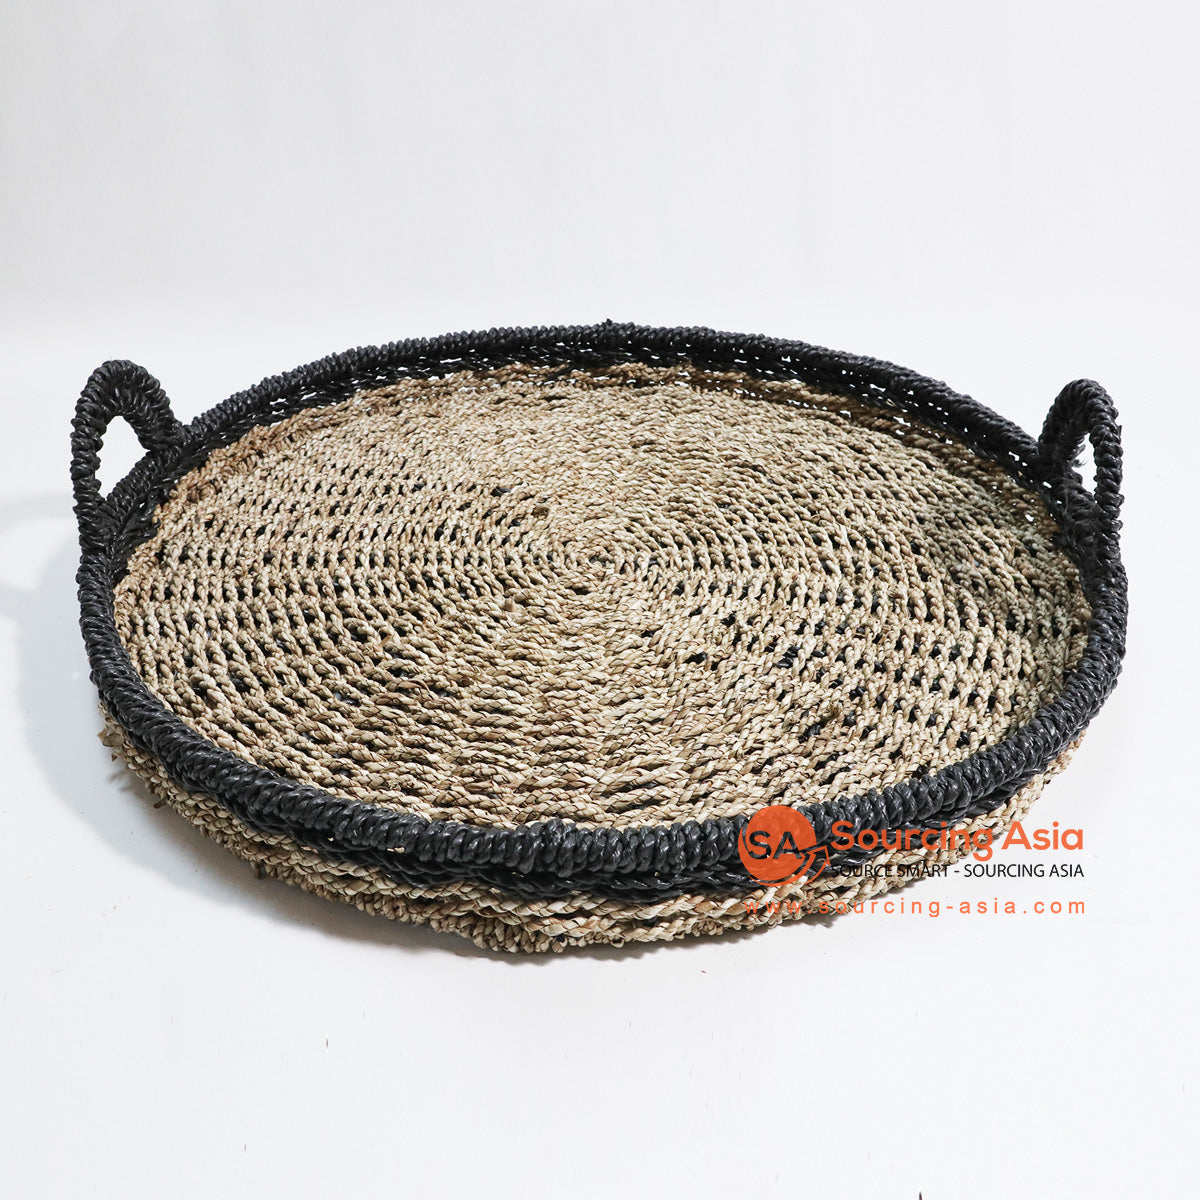 HBSC024-1 NATURAL AND BLACK TRIM SEA GRASS TRAY WITH HANDLE